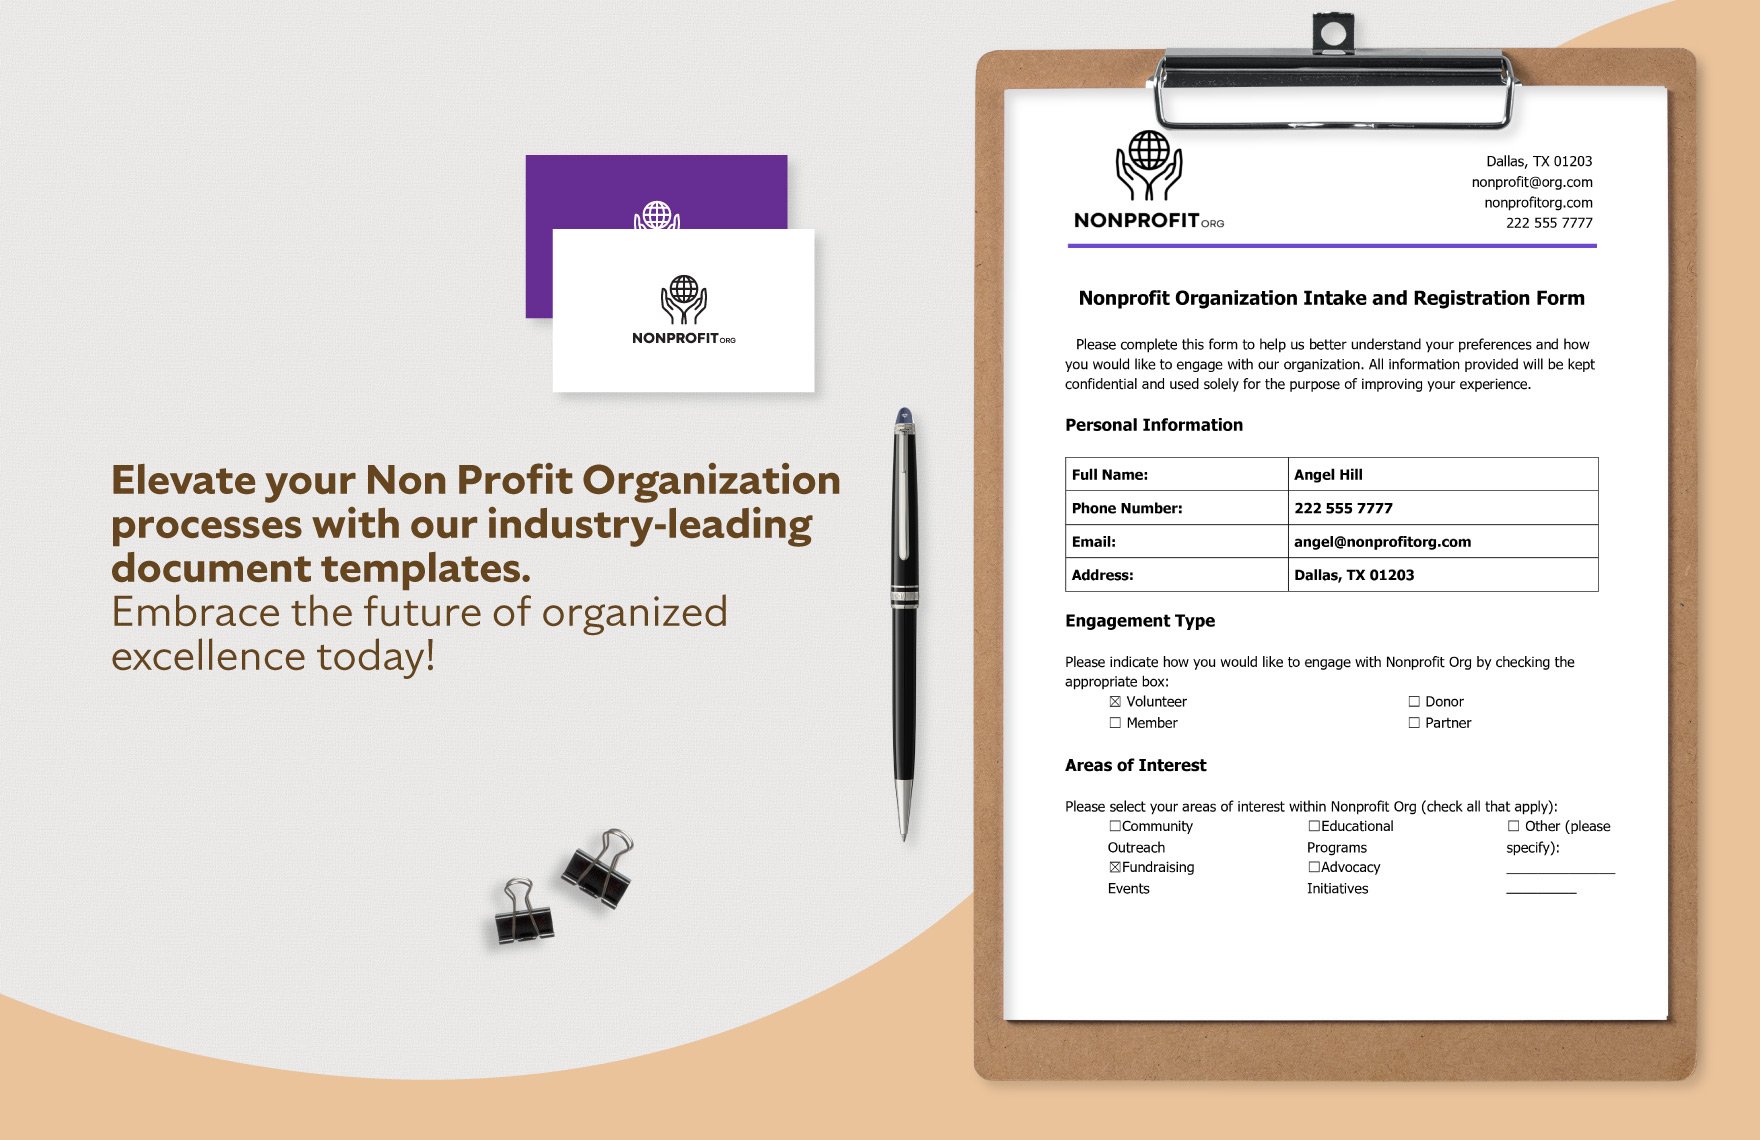 Nonprofit Organization Intake and Registration Form Template